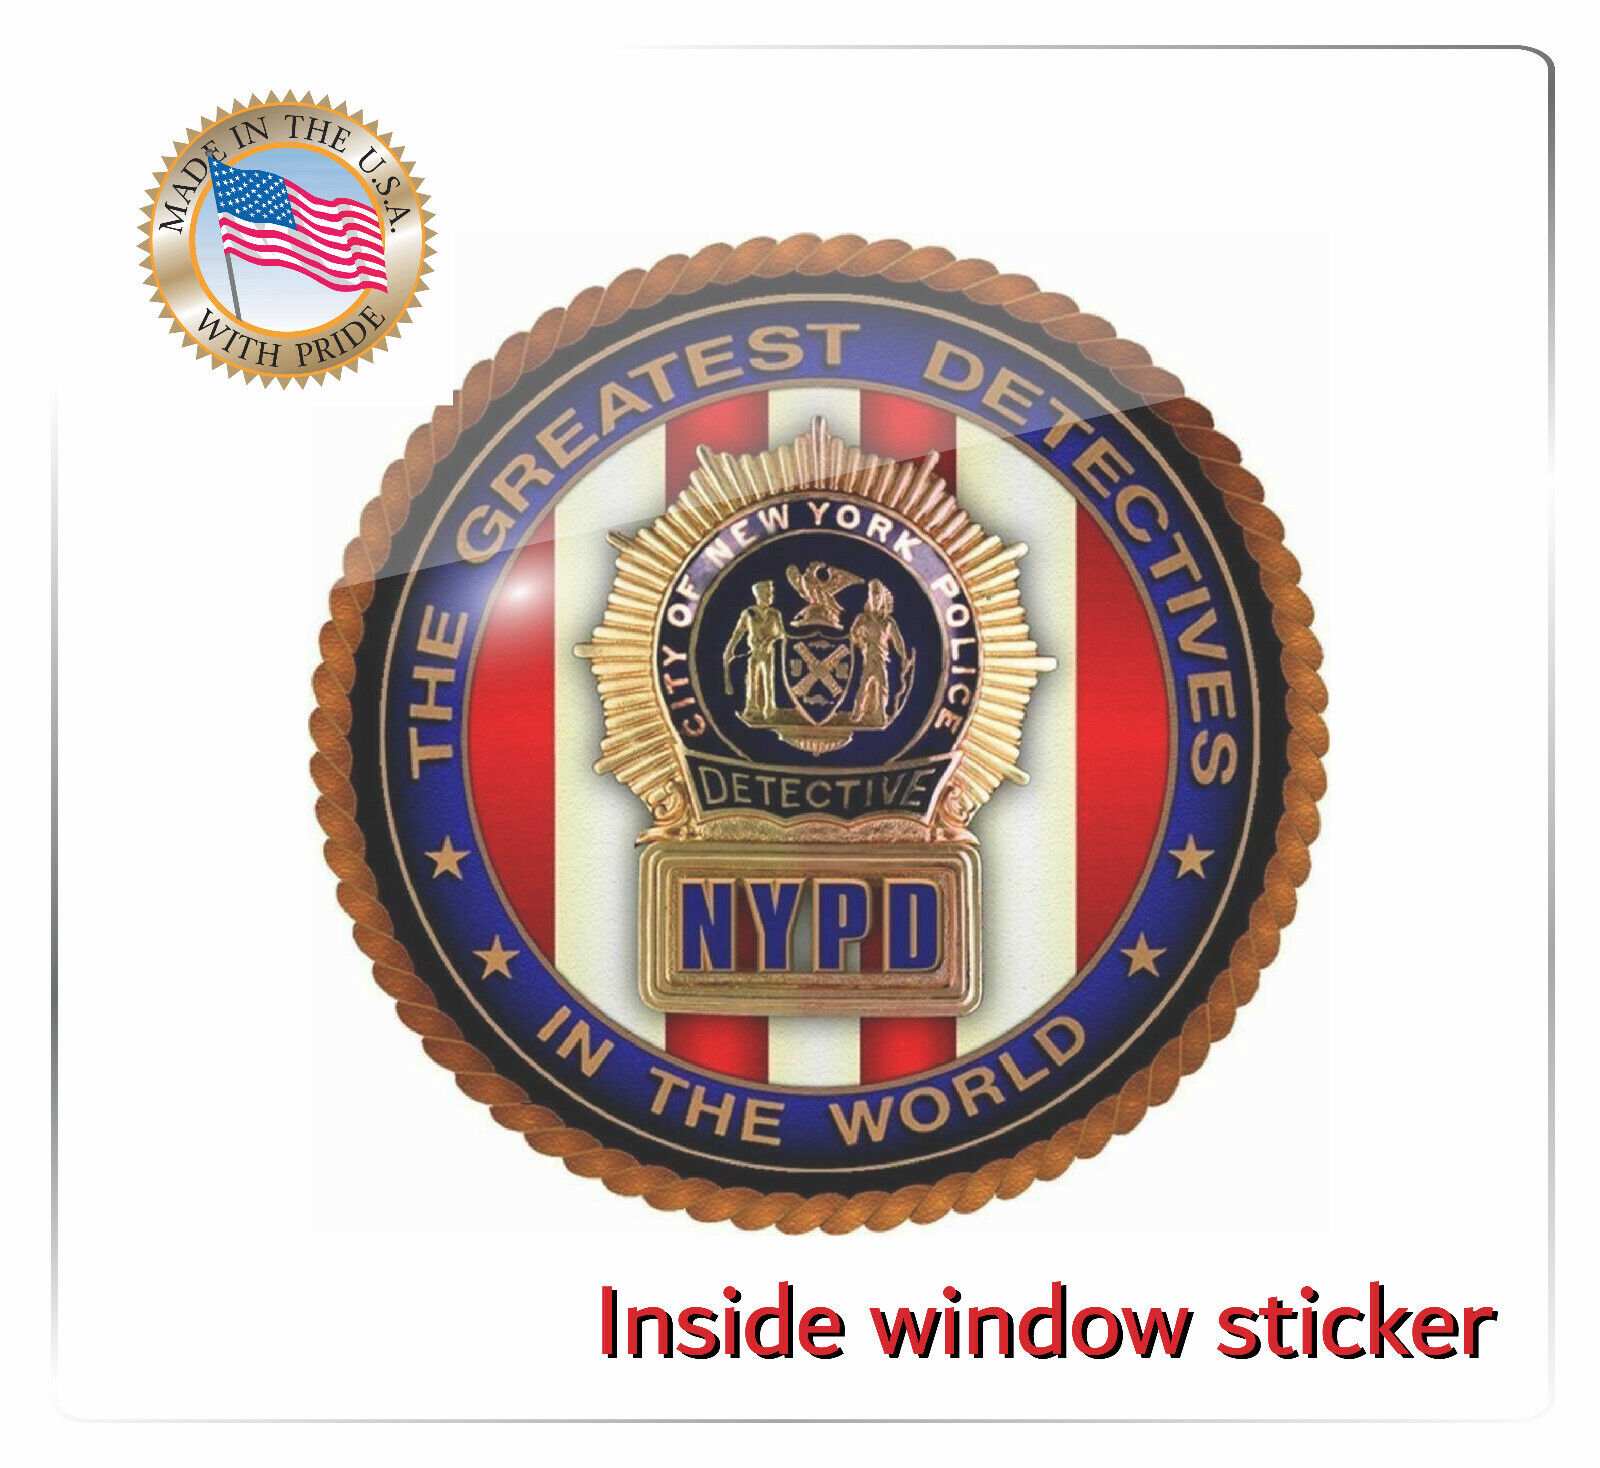 NYPD STICKER INSIDE WINDOW MOUNT DECAL CAR MADE IN USA